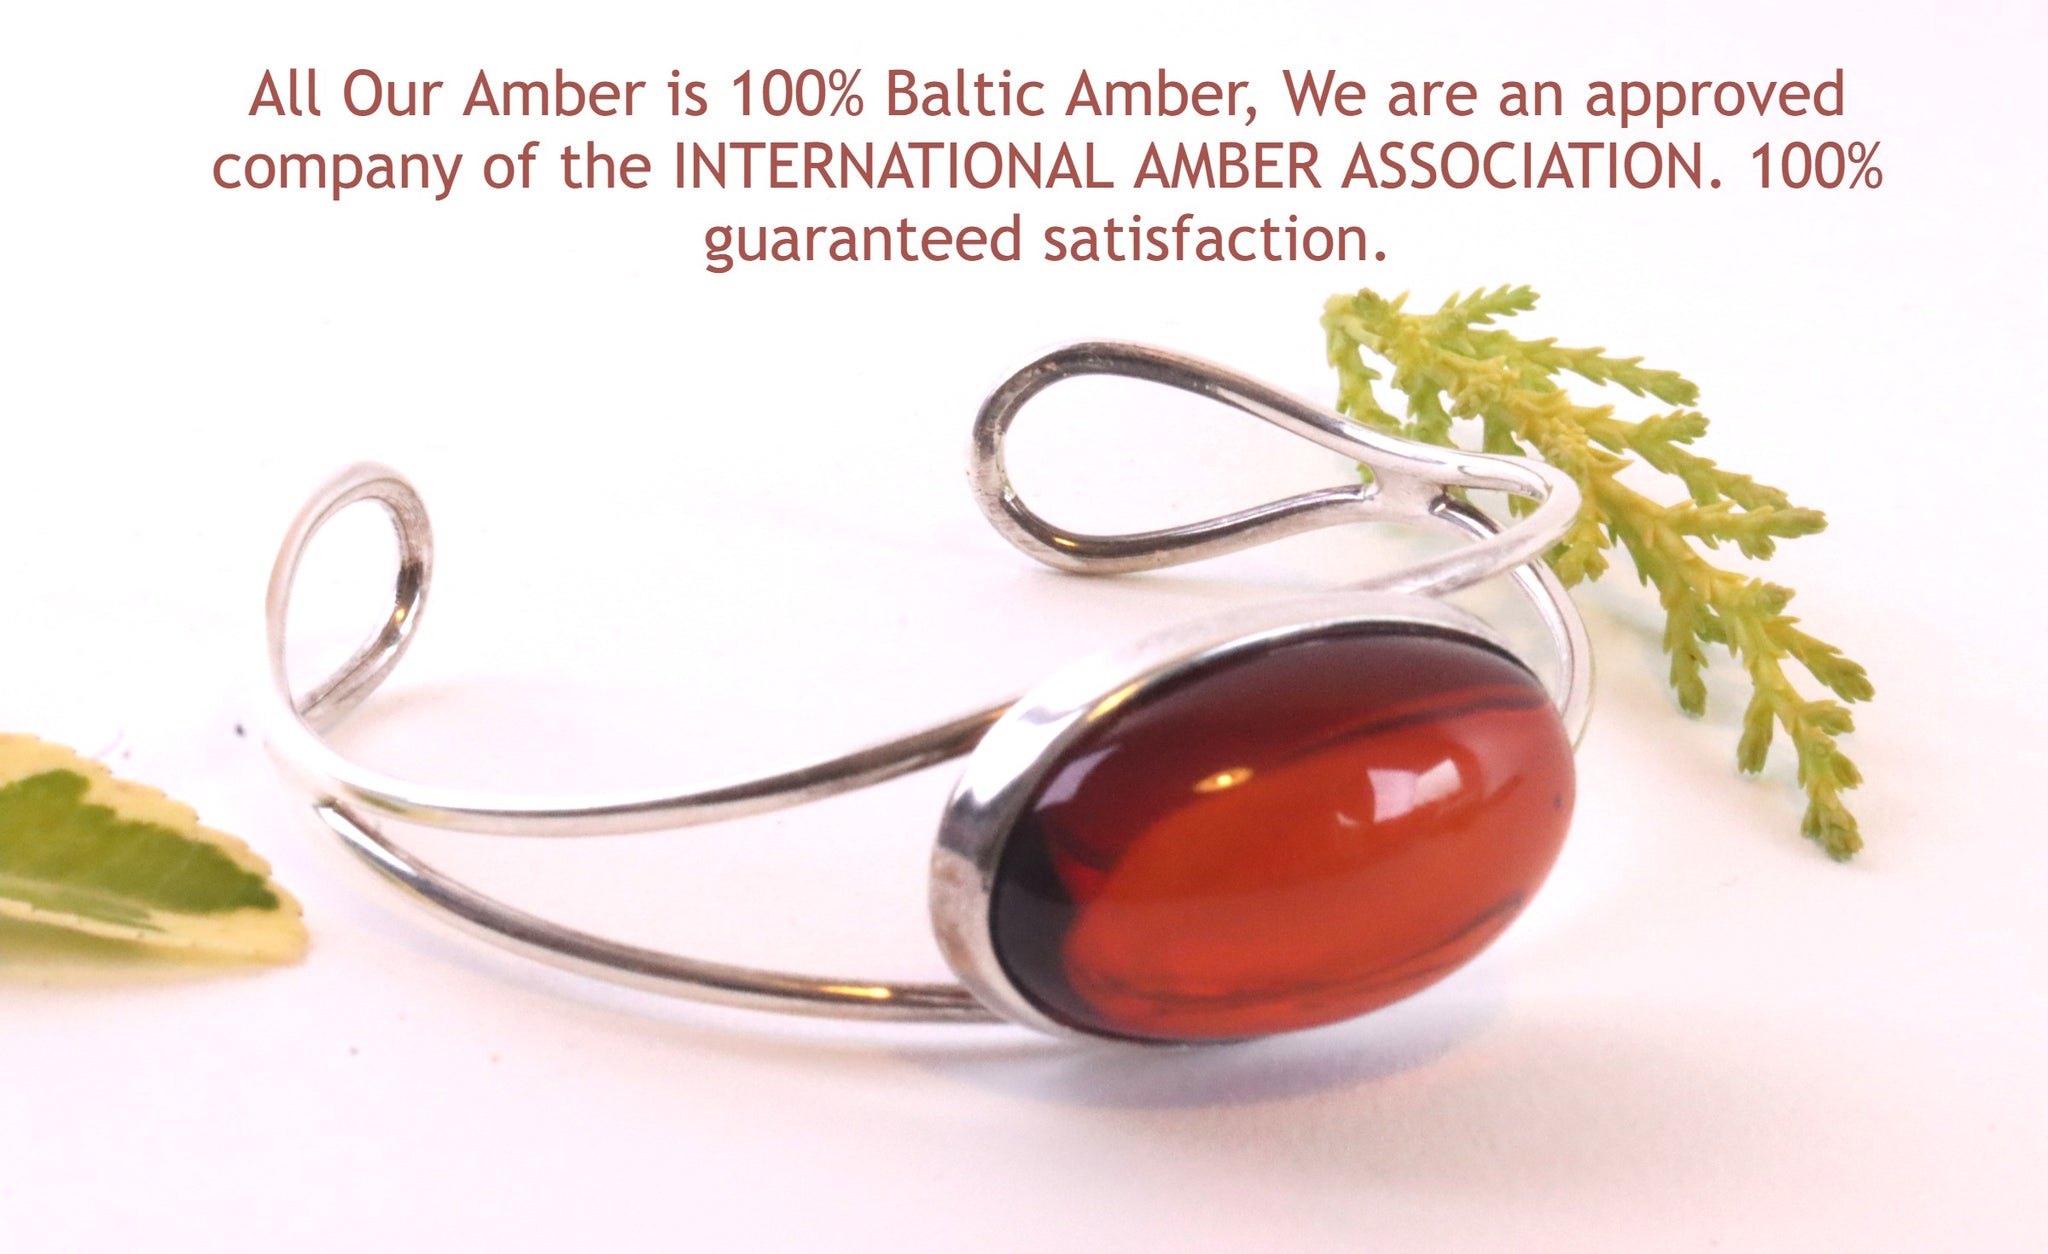 Red Baltic Amber Bangle with FREE Pendant on Sterling Silver